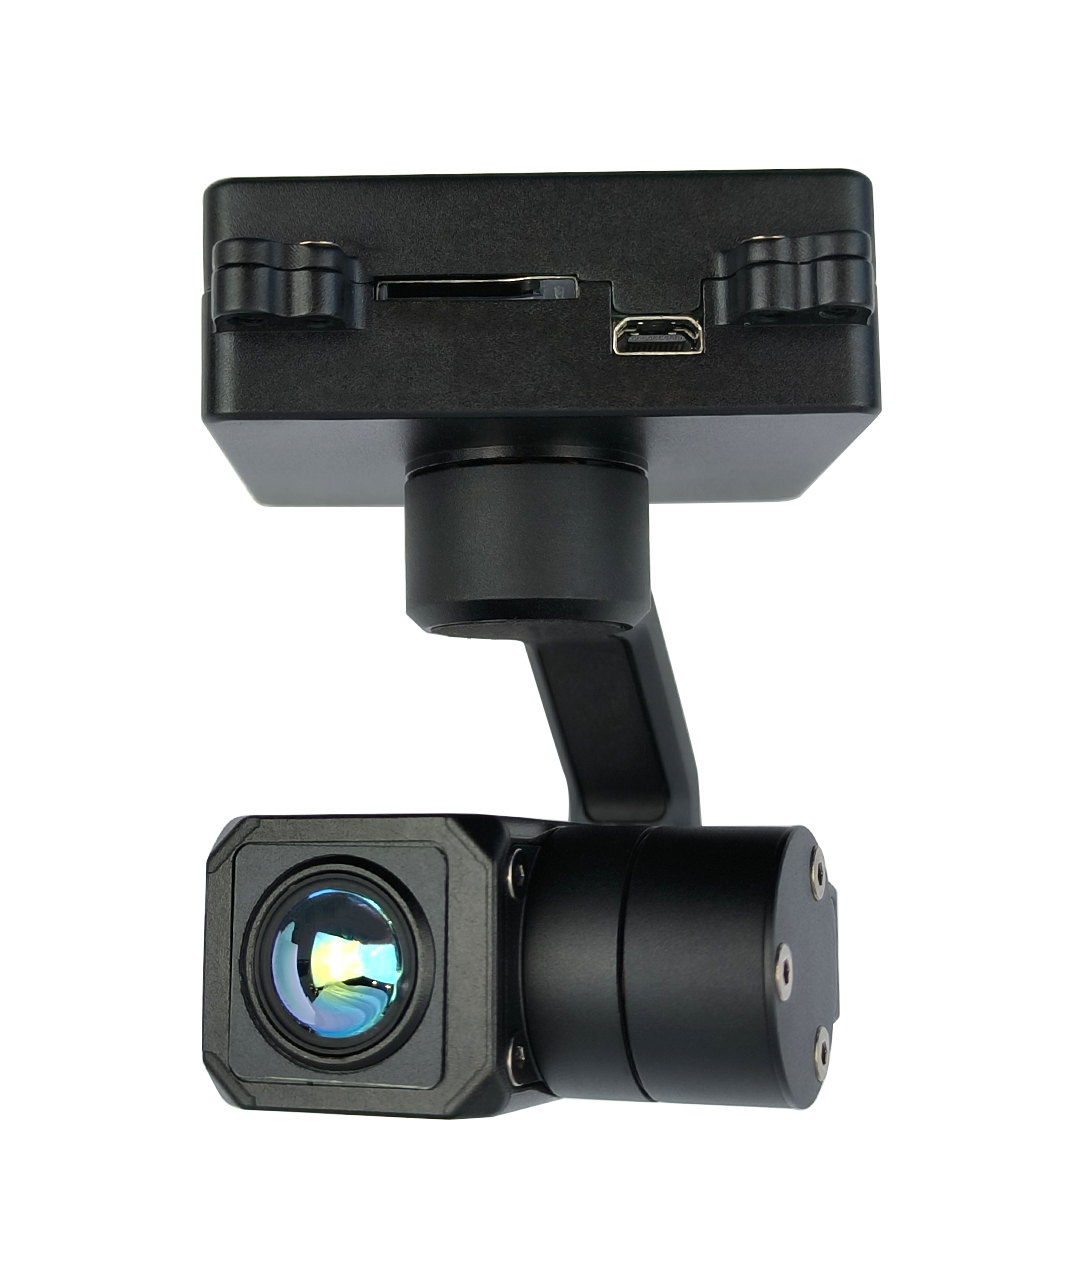 TOPOTEK HP640M5 3-Axis Single Thermal Camera Gimbal - 9X Digital Zoom 640x512 8.7mm Thermal Camera With 3-Axis Stabilization